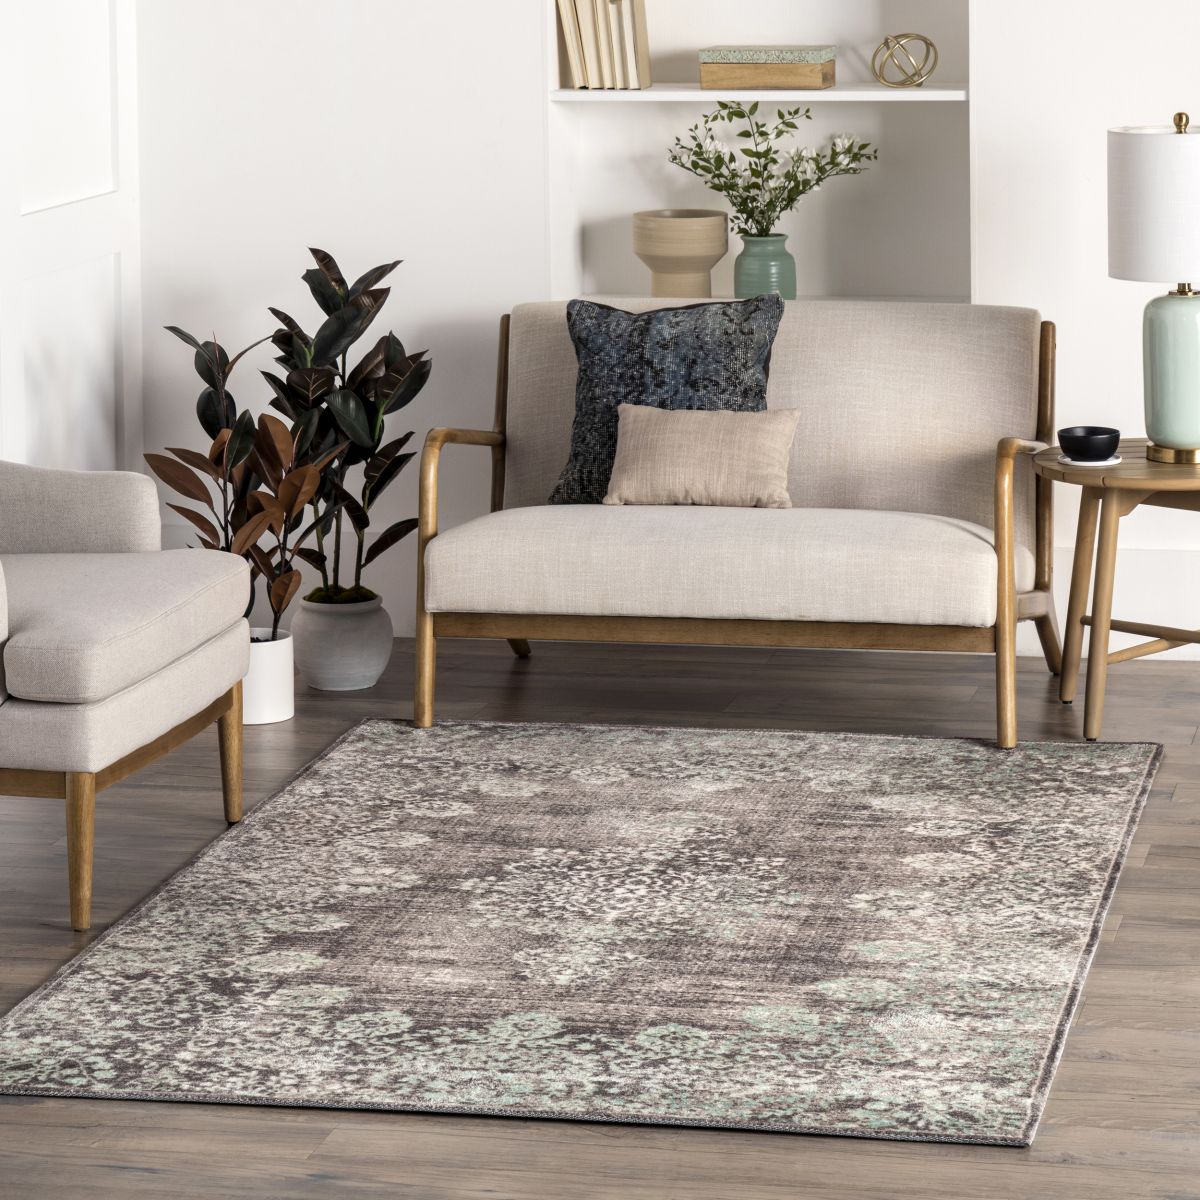 Teal Faded Lace Area Rug | Rugs USA